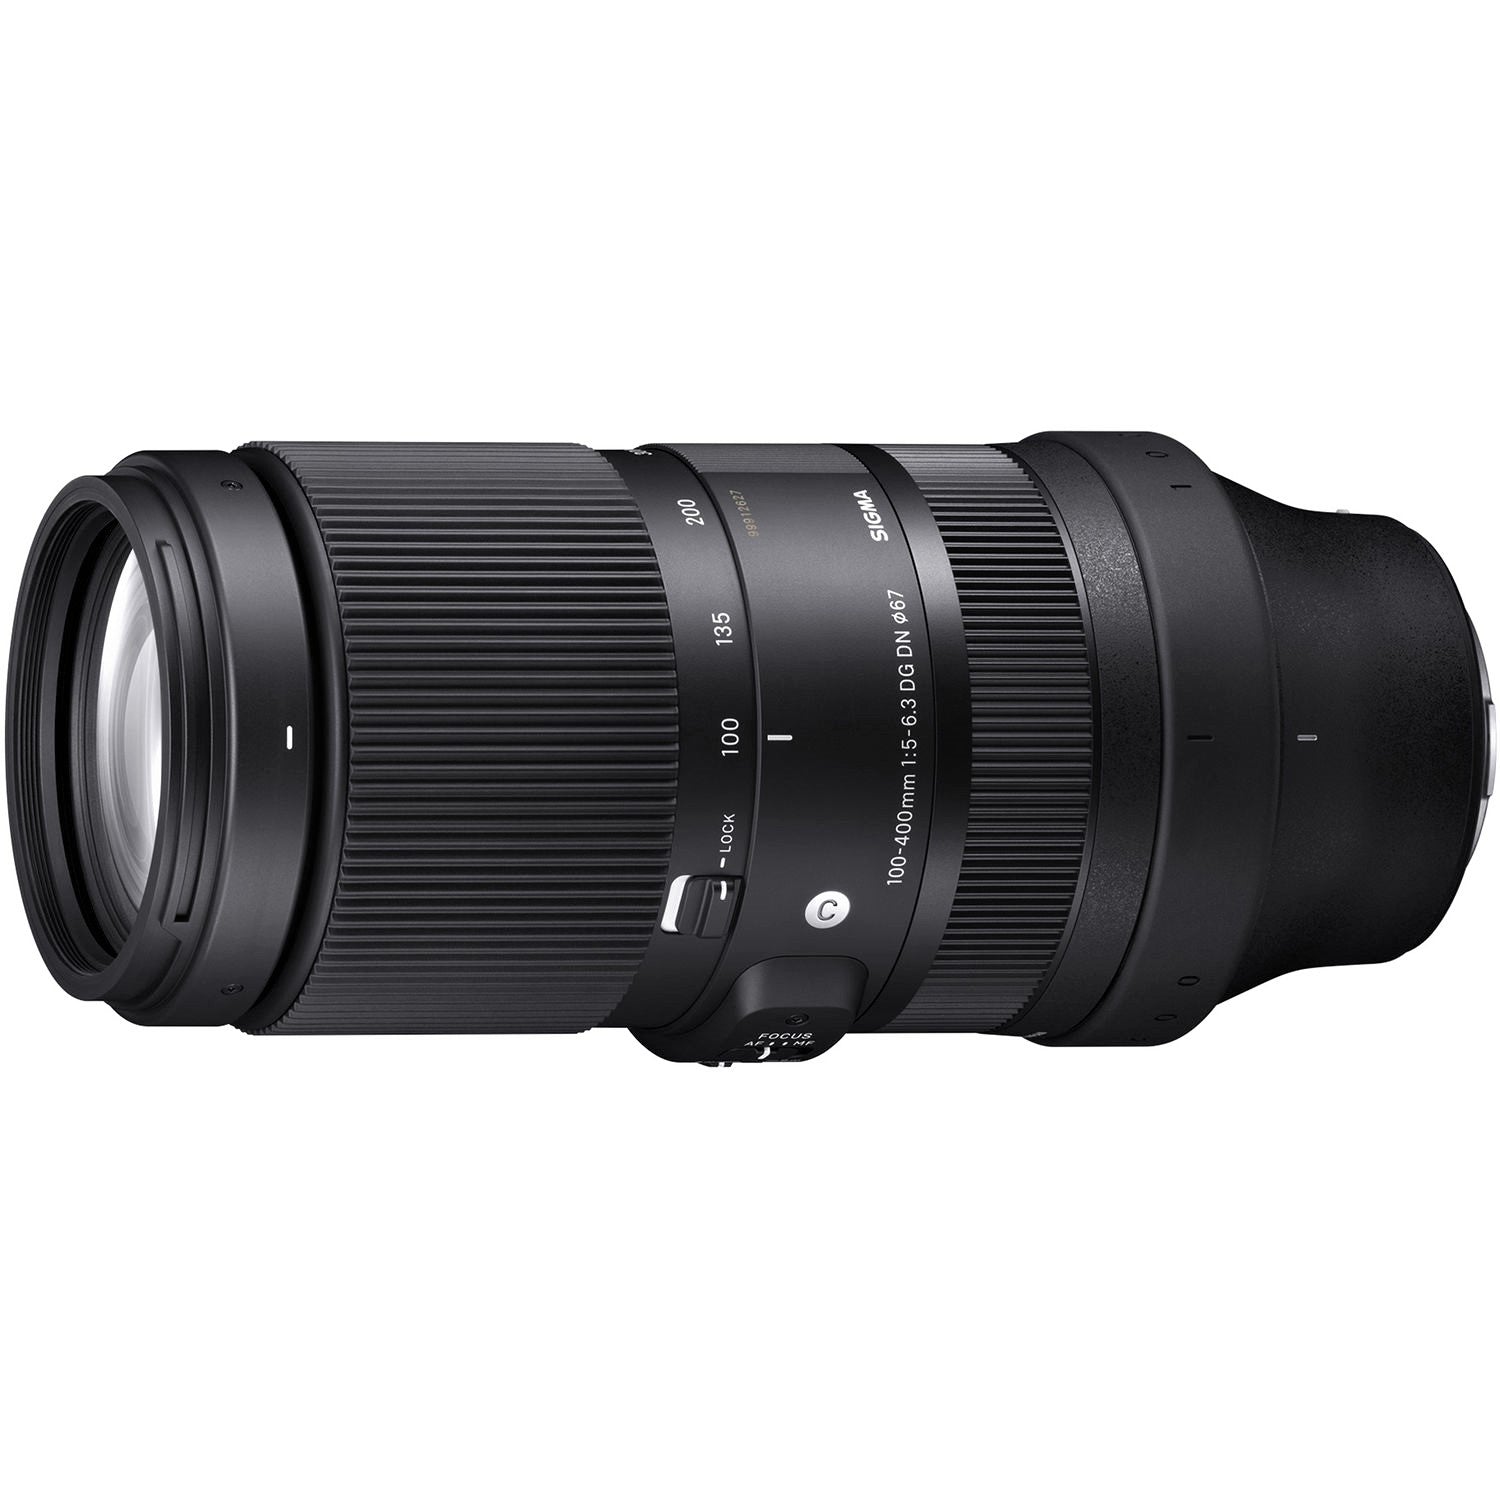 Sigma 100-400mm F5-6.3 DG DN OS Overview